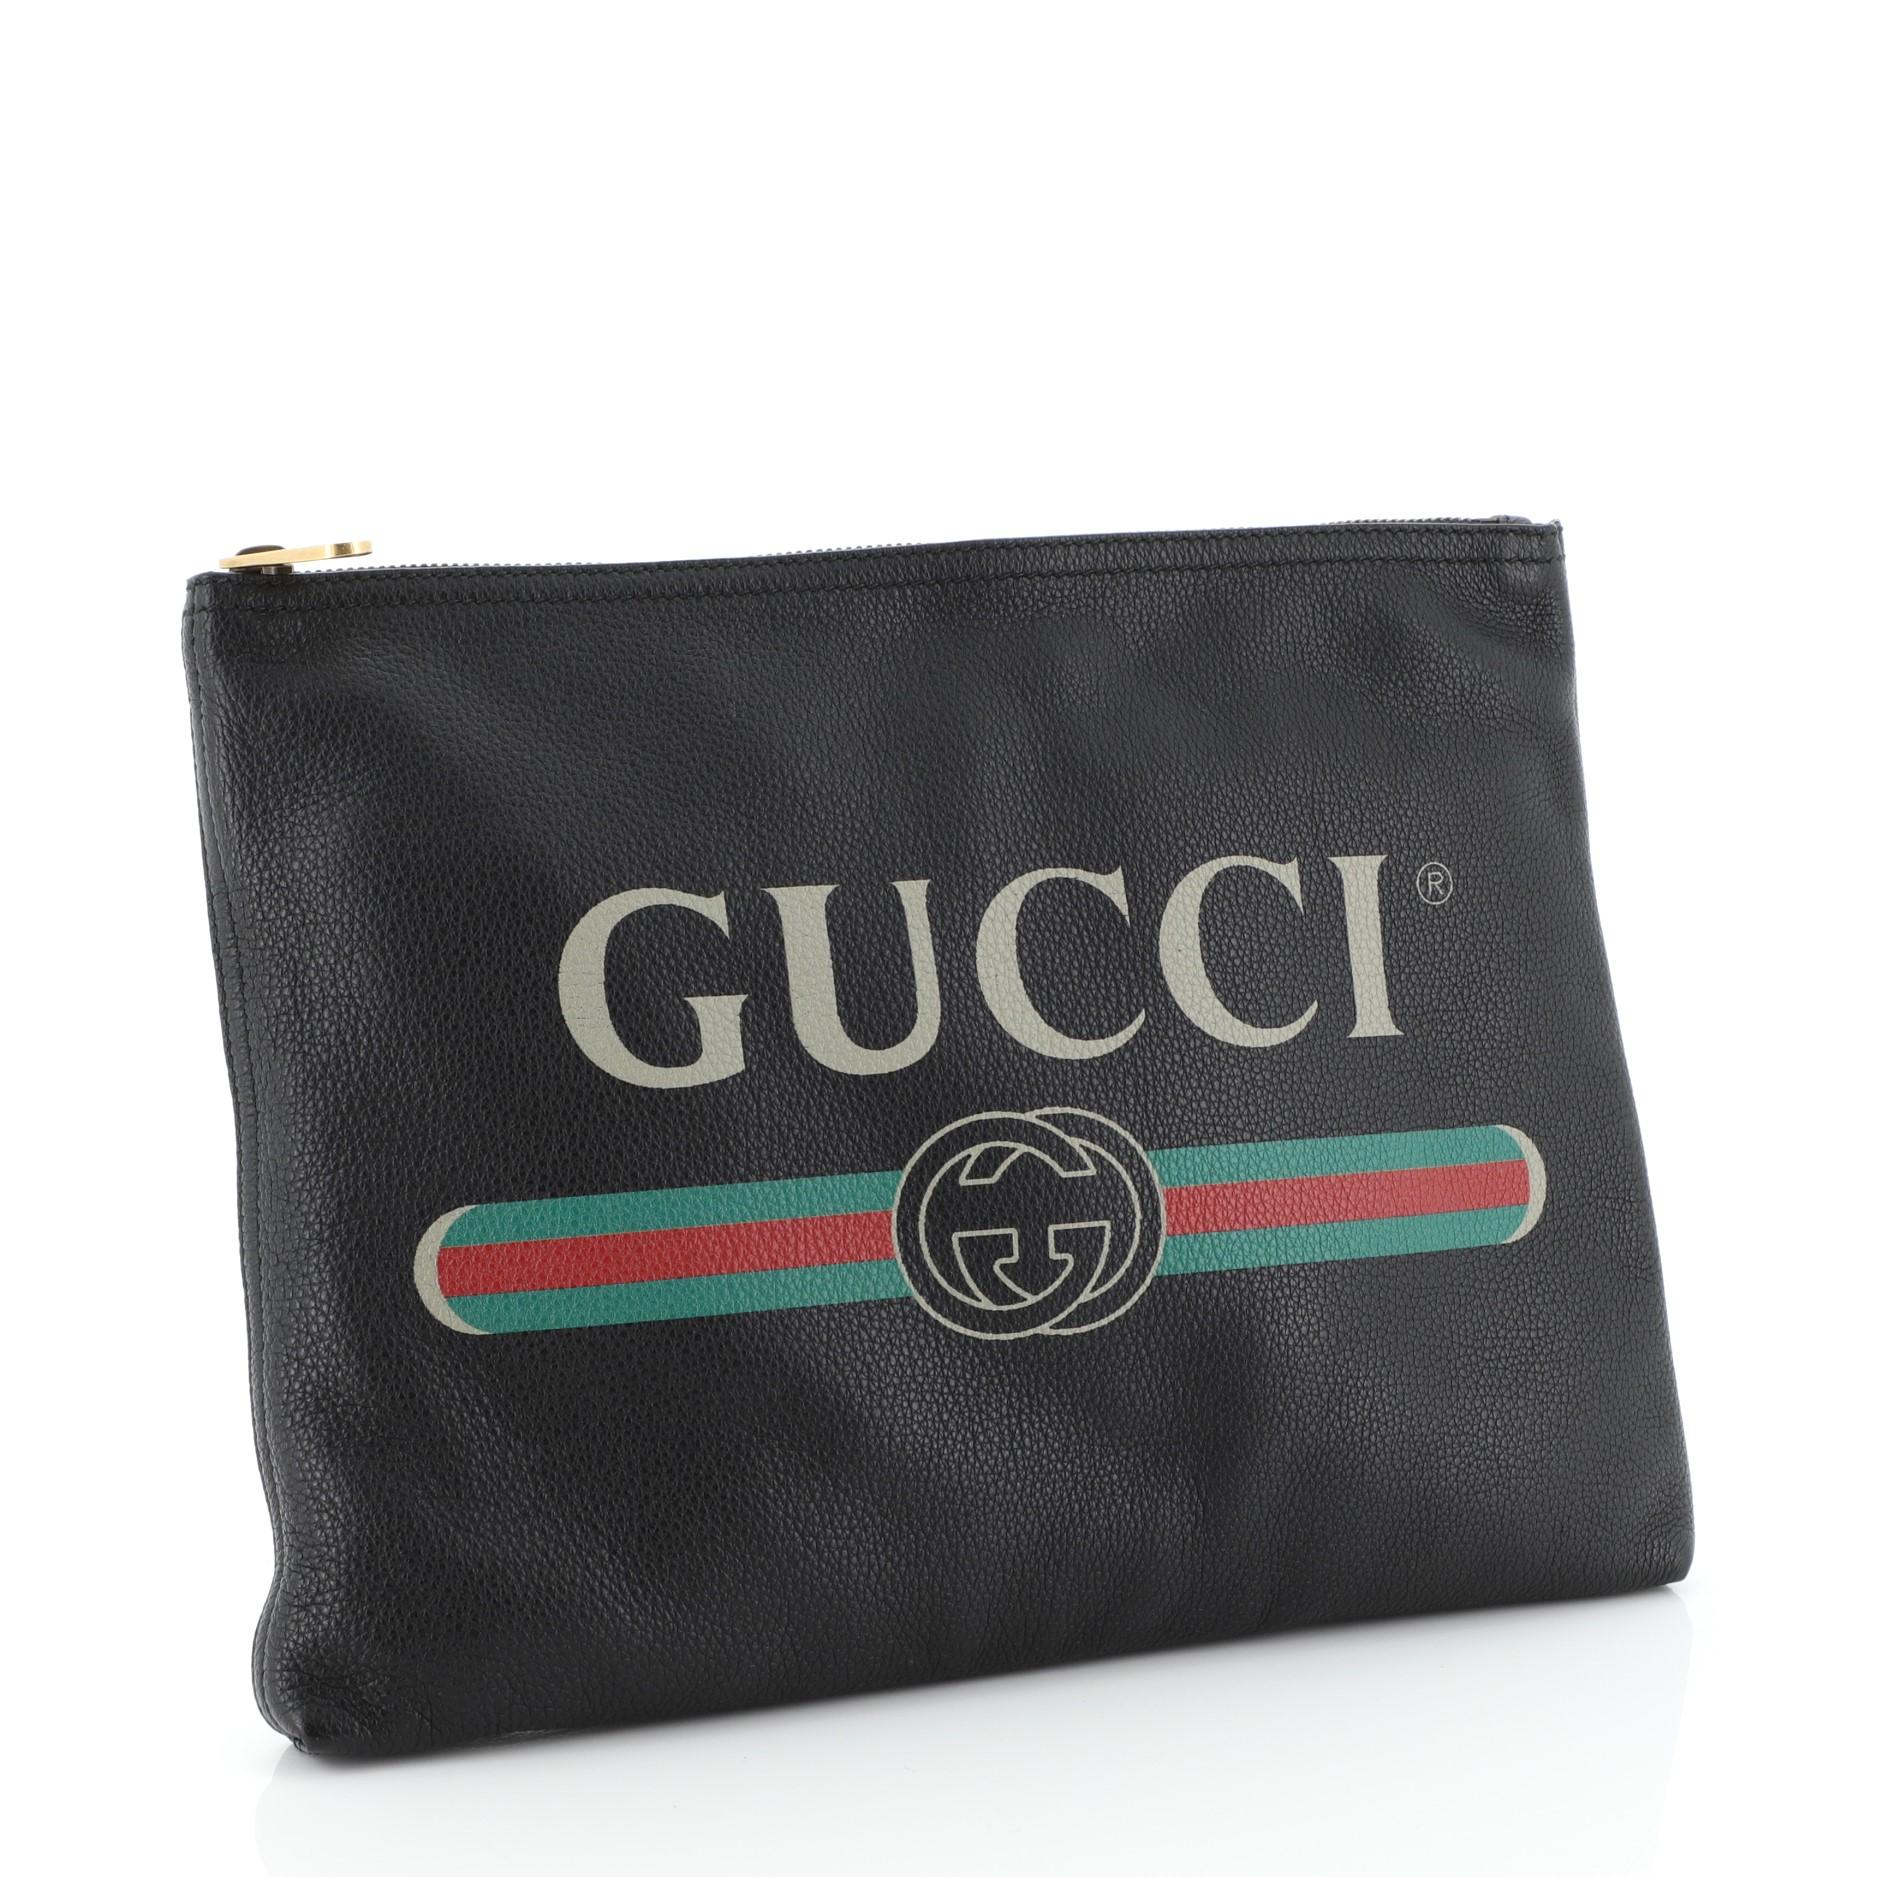 This Gucci Logo Portfolio Clutch Printed Leather Medium, crafted from pink and black leather, features printed Gucci logo and aged gold-tone hardware. Its zip closure opens to a black suede interior. 

Estimated Retail Price: $950
Condition: Great.